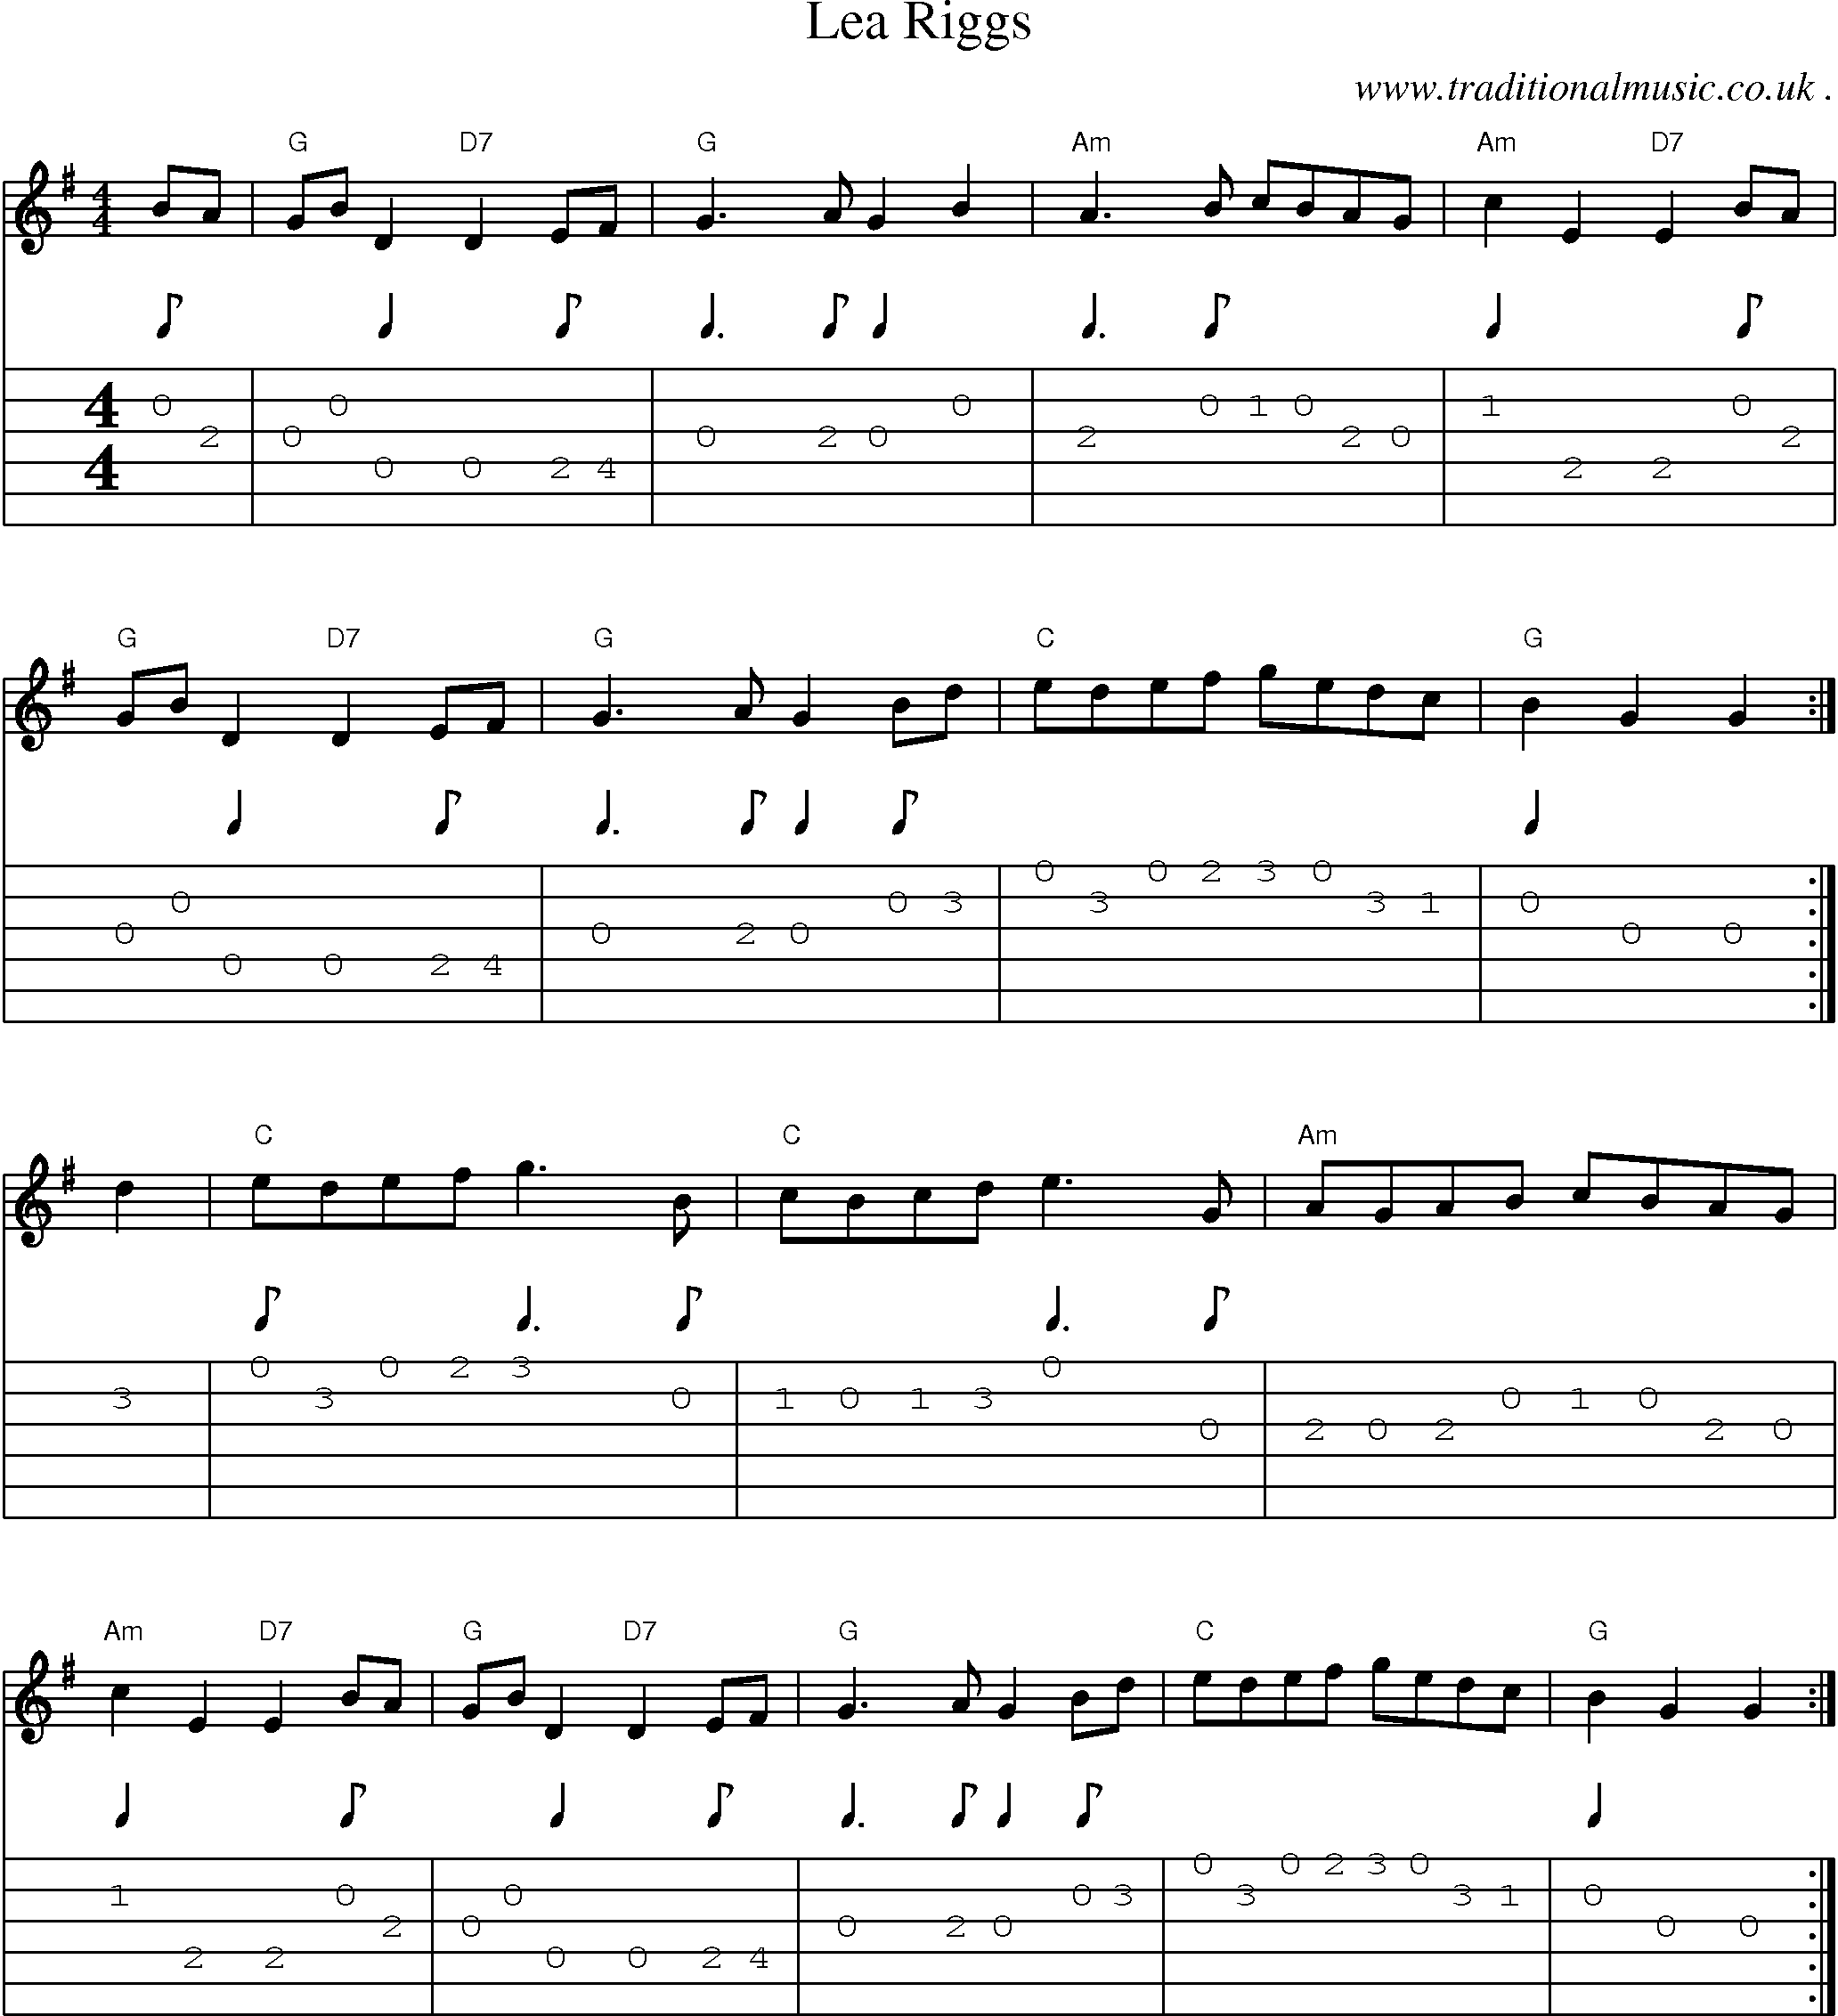 Sheet-Music and Guitar Tabs for Lea Riggs